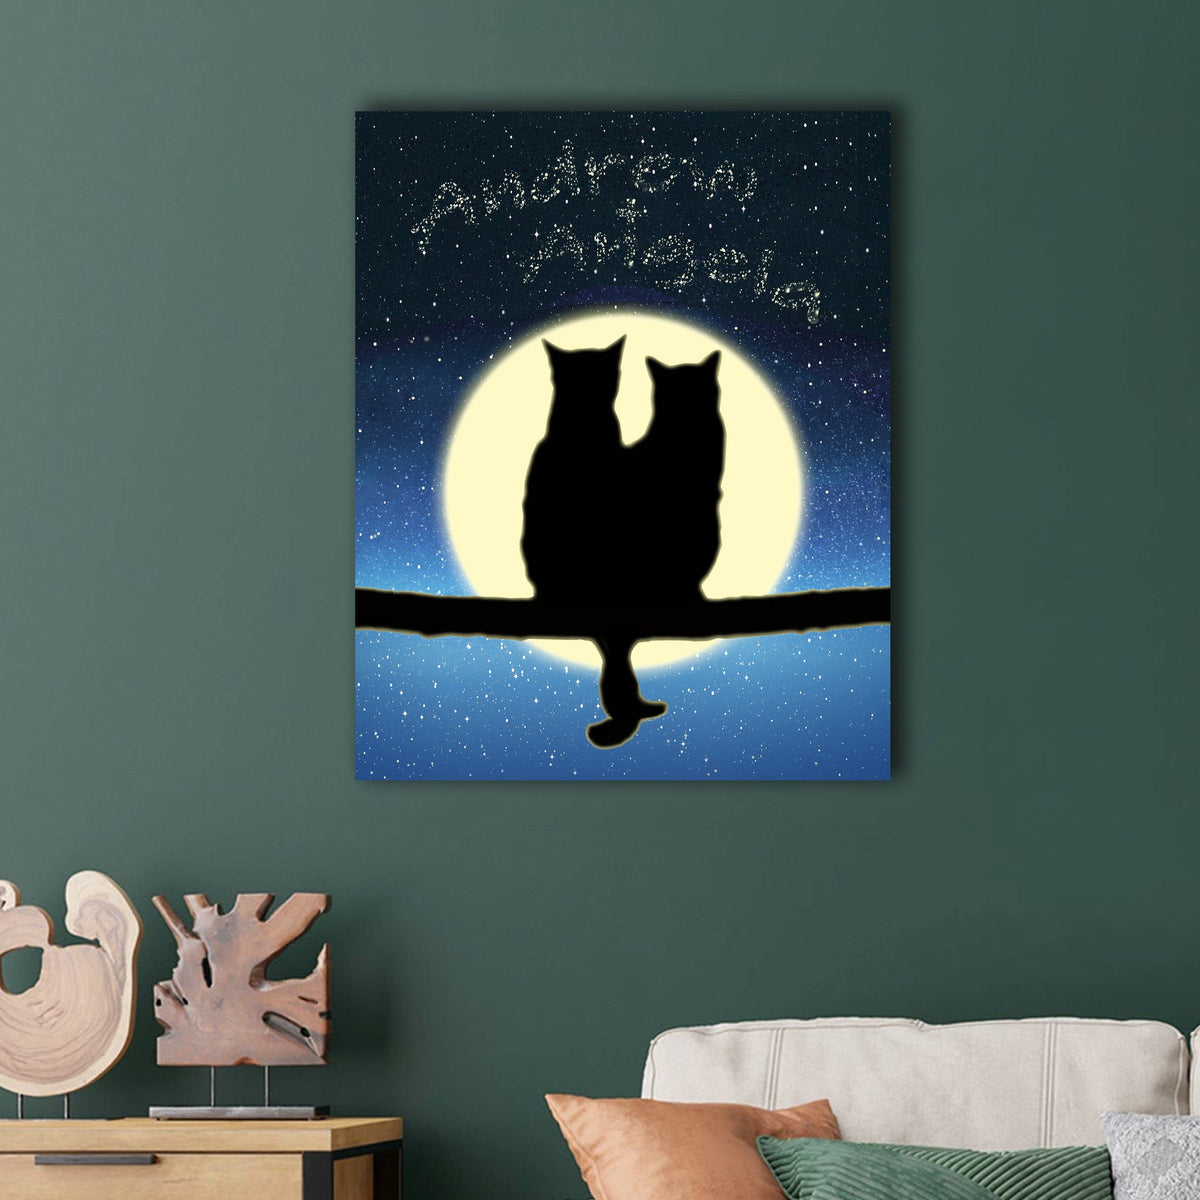 Personalized cat art and gifts from Personal Prints